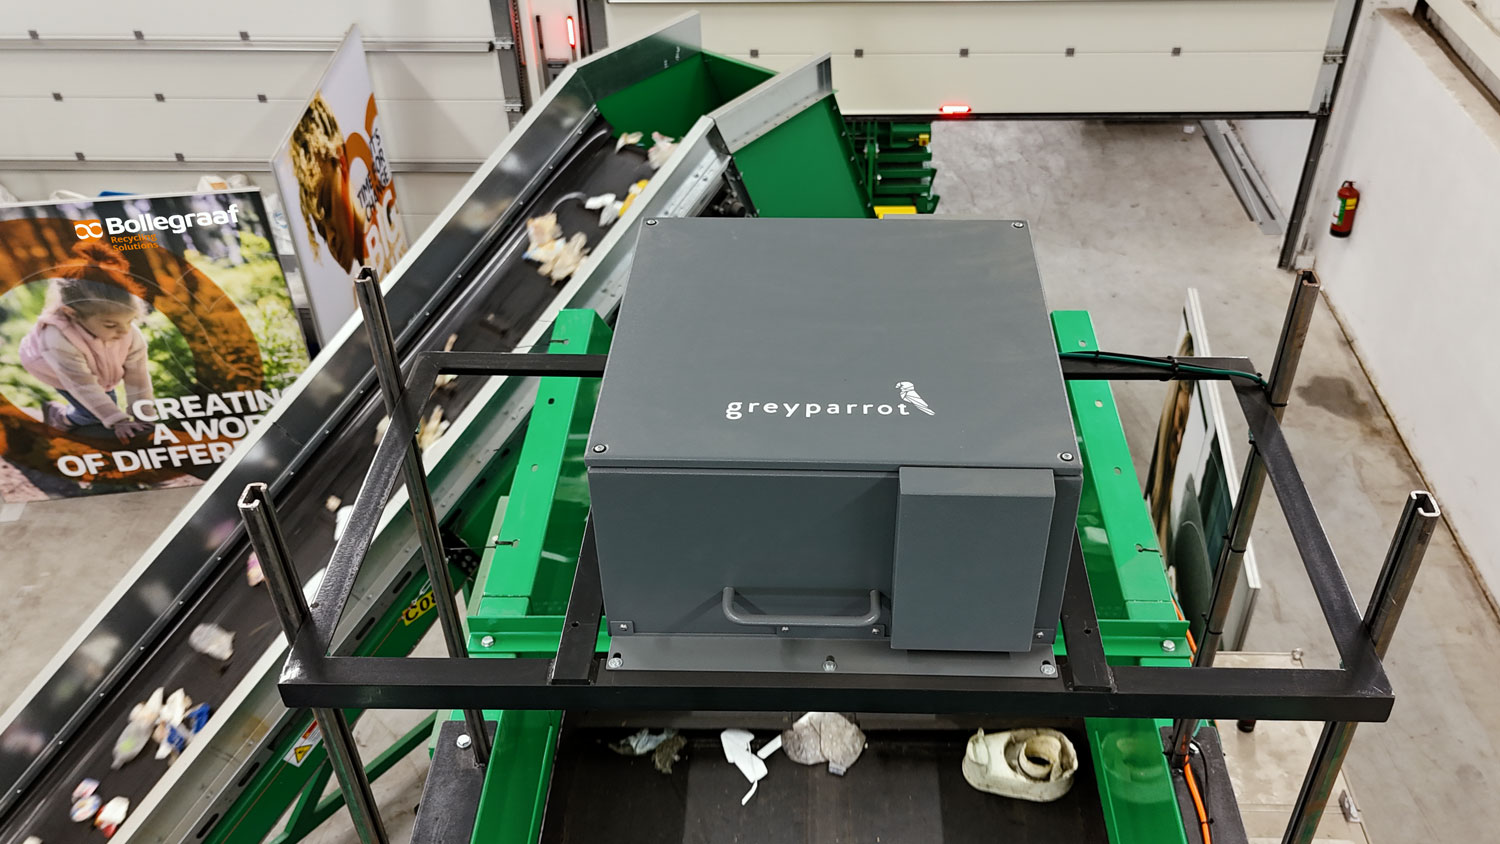 UK AI startup Greyparrot bags strategic tie-up with recycling giant Bollegraaf